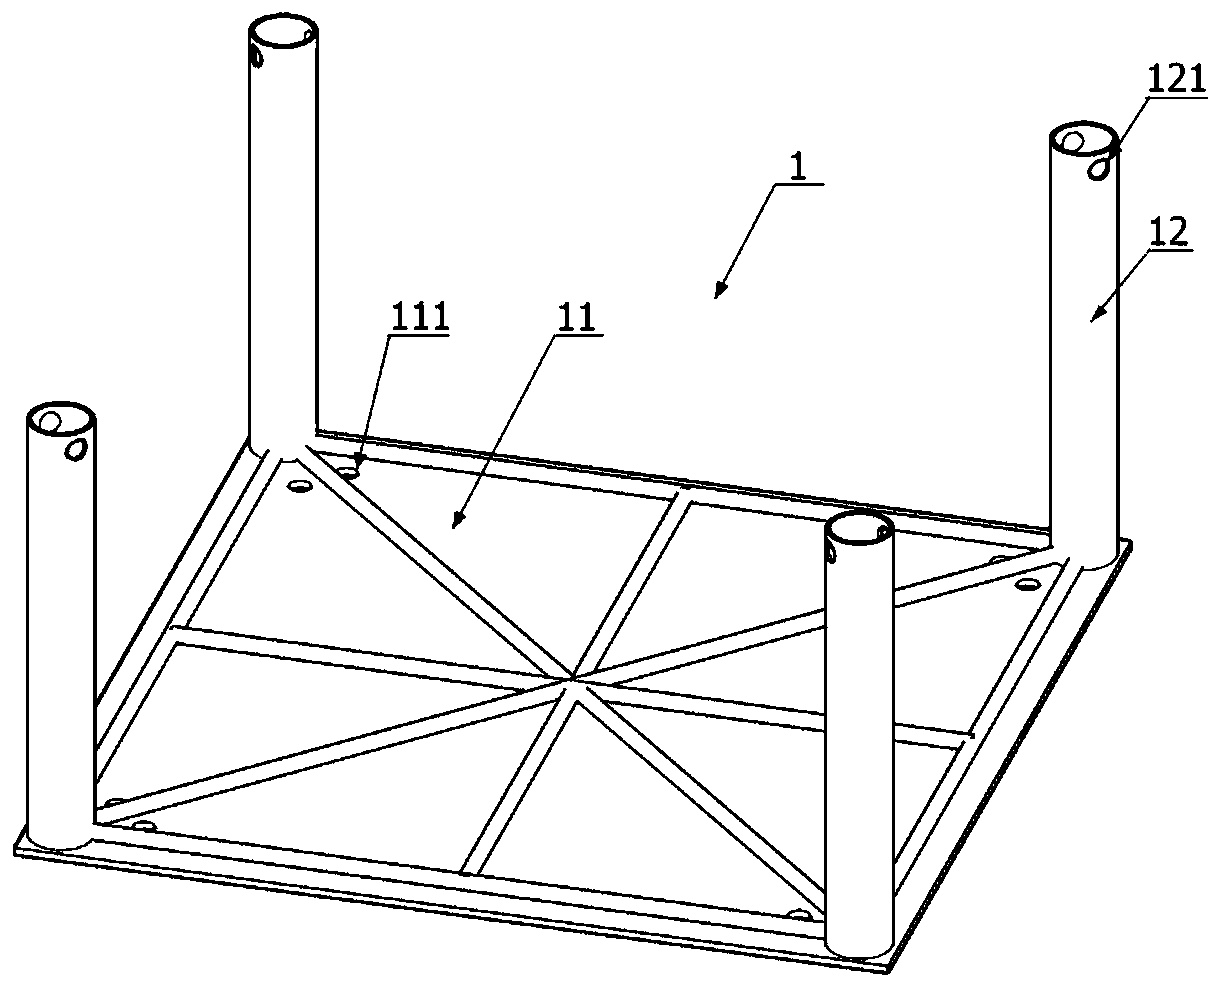 Height-adjustable safety protective shed with operation platform function